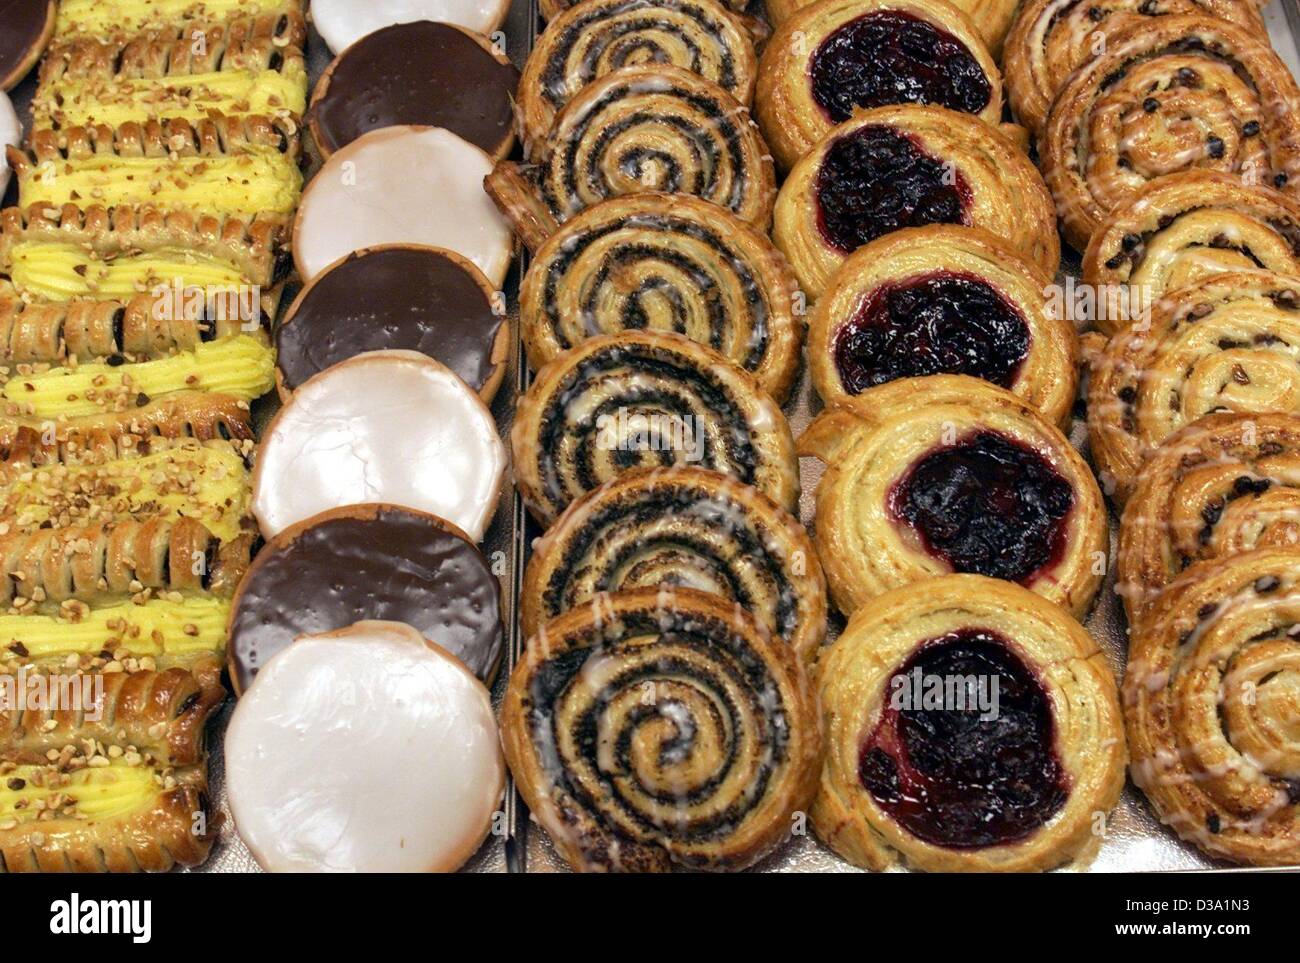 (dpa)  - Sweet pastries are at display in a Kamps bakery shop in Schwalmtal, Germany, 16 November 2000. Stock Photo